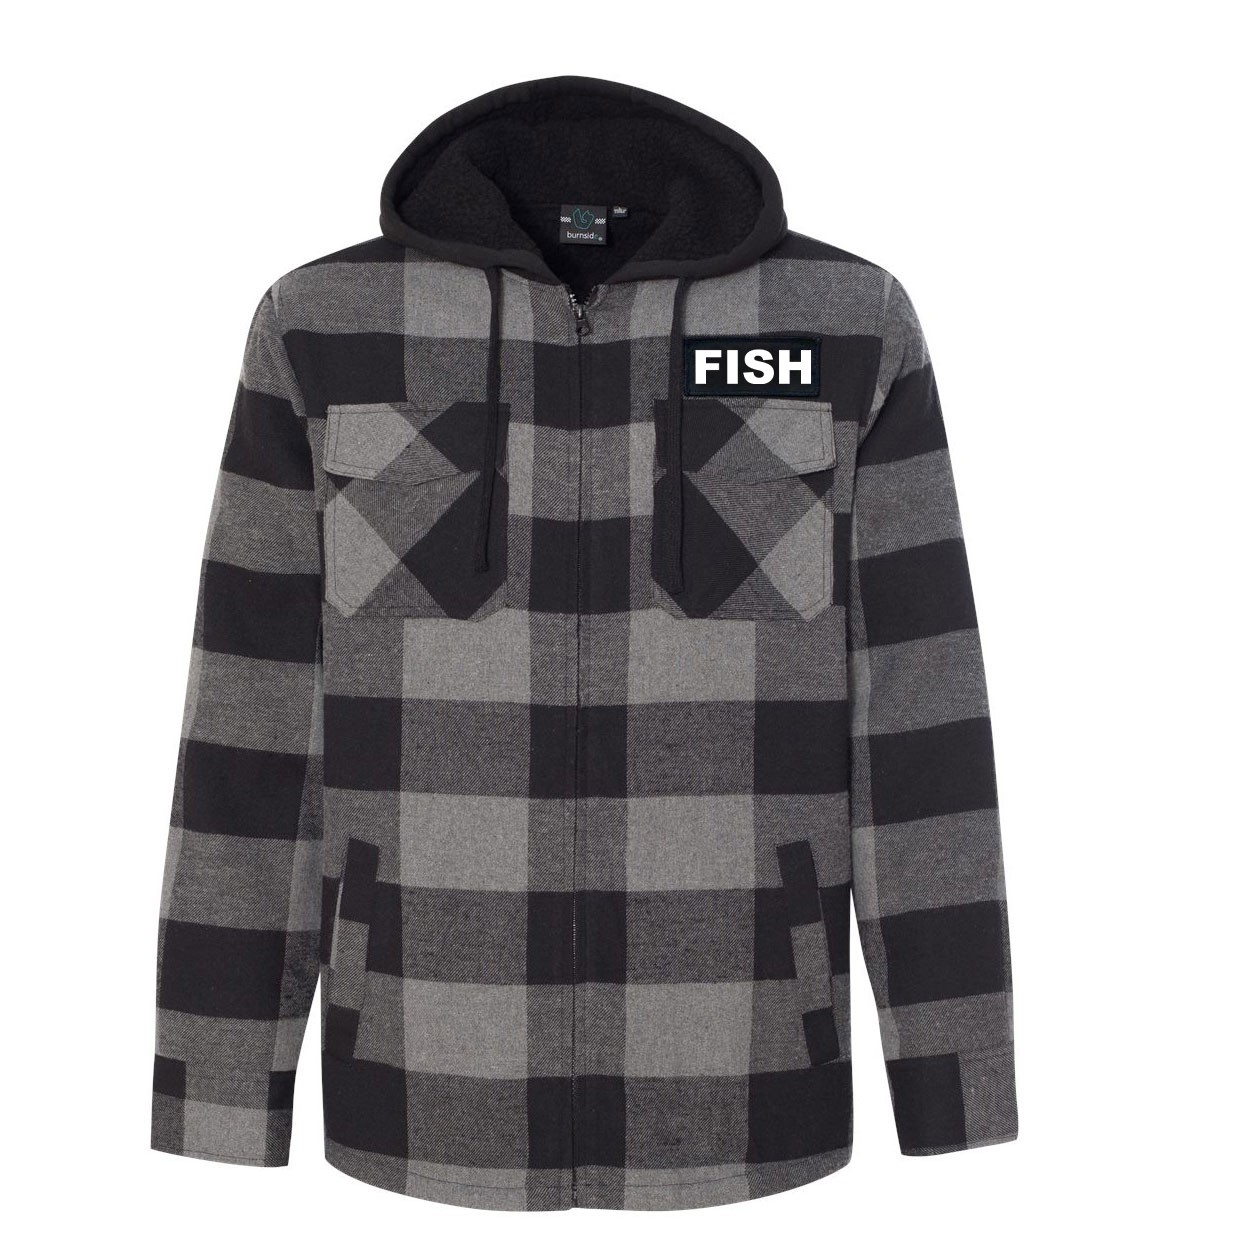 Fish Brand Logo Classic Unisex Full Zip Woven Patch Hooded Flannel Jacket Black/Gray (White Logo)